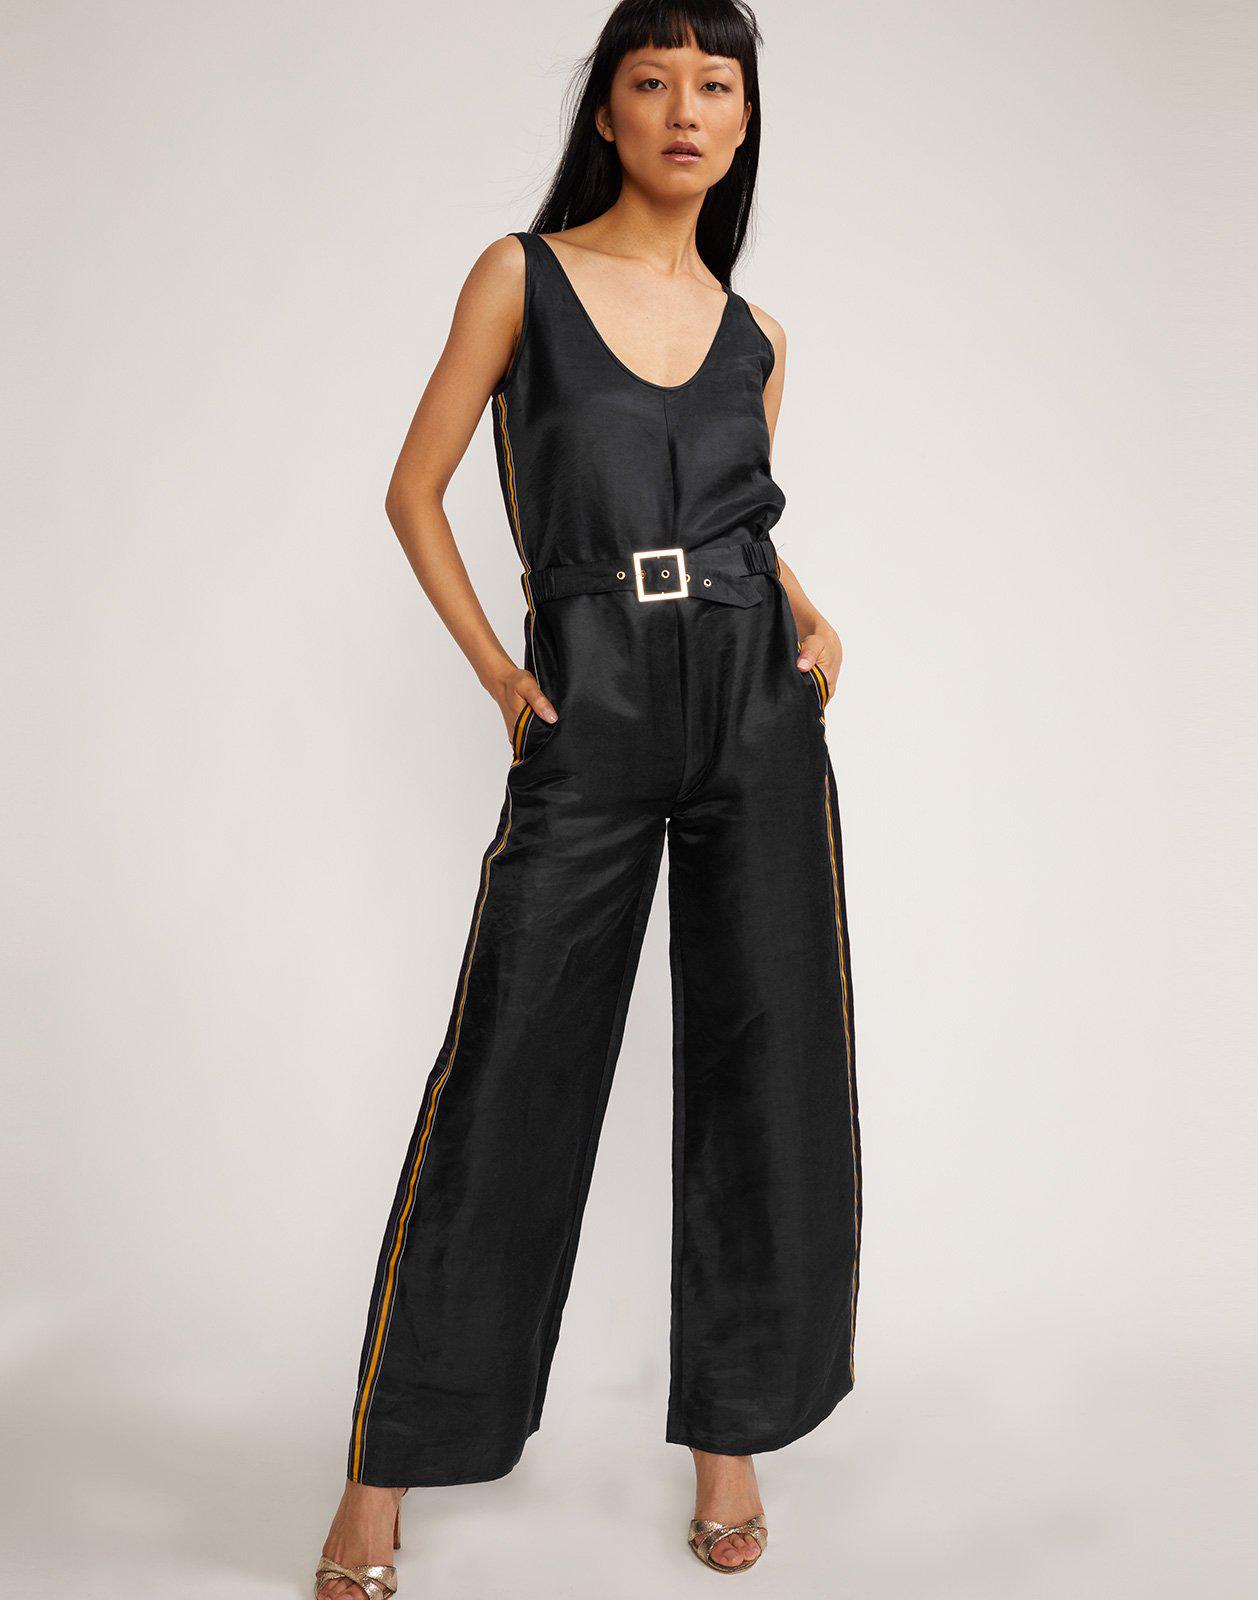 Cynthia Rowley Synthetic Dylan Wide Leg Jumpsuit in Black - Lyst